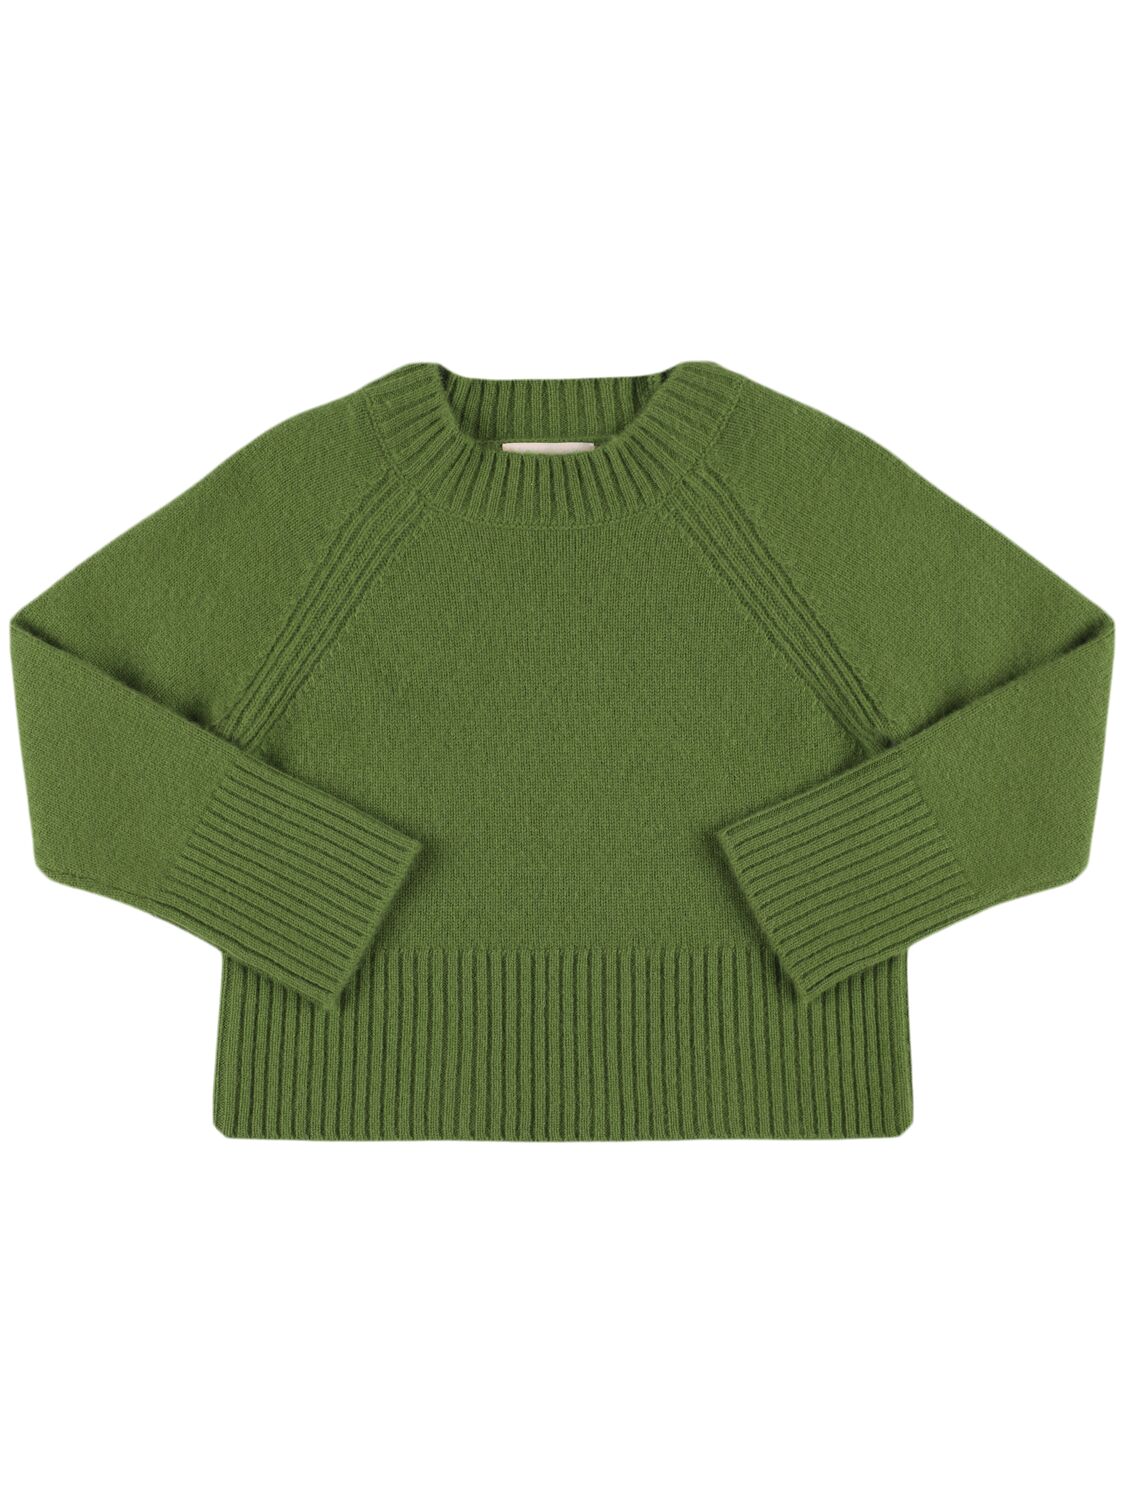 Bonpoint Kids' Cashmere Knit Sweater In Green